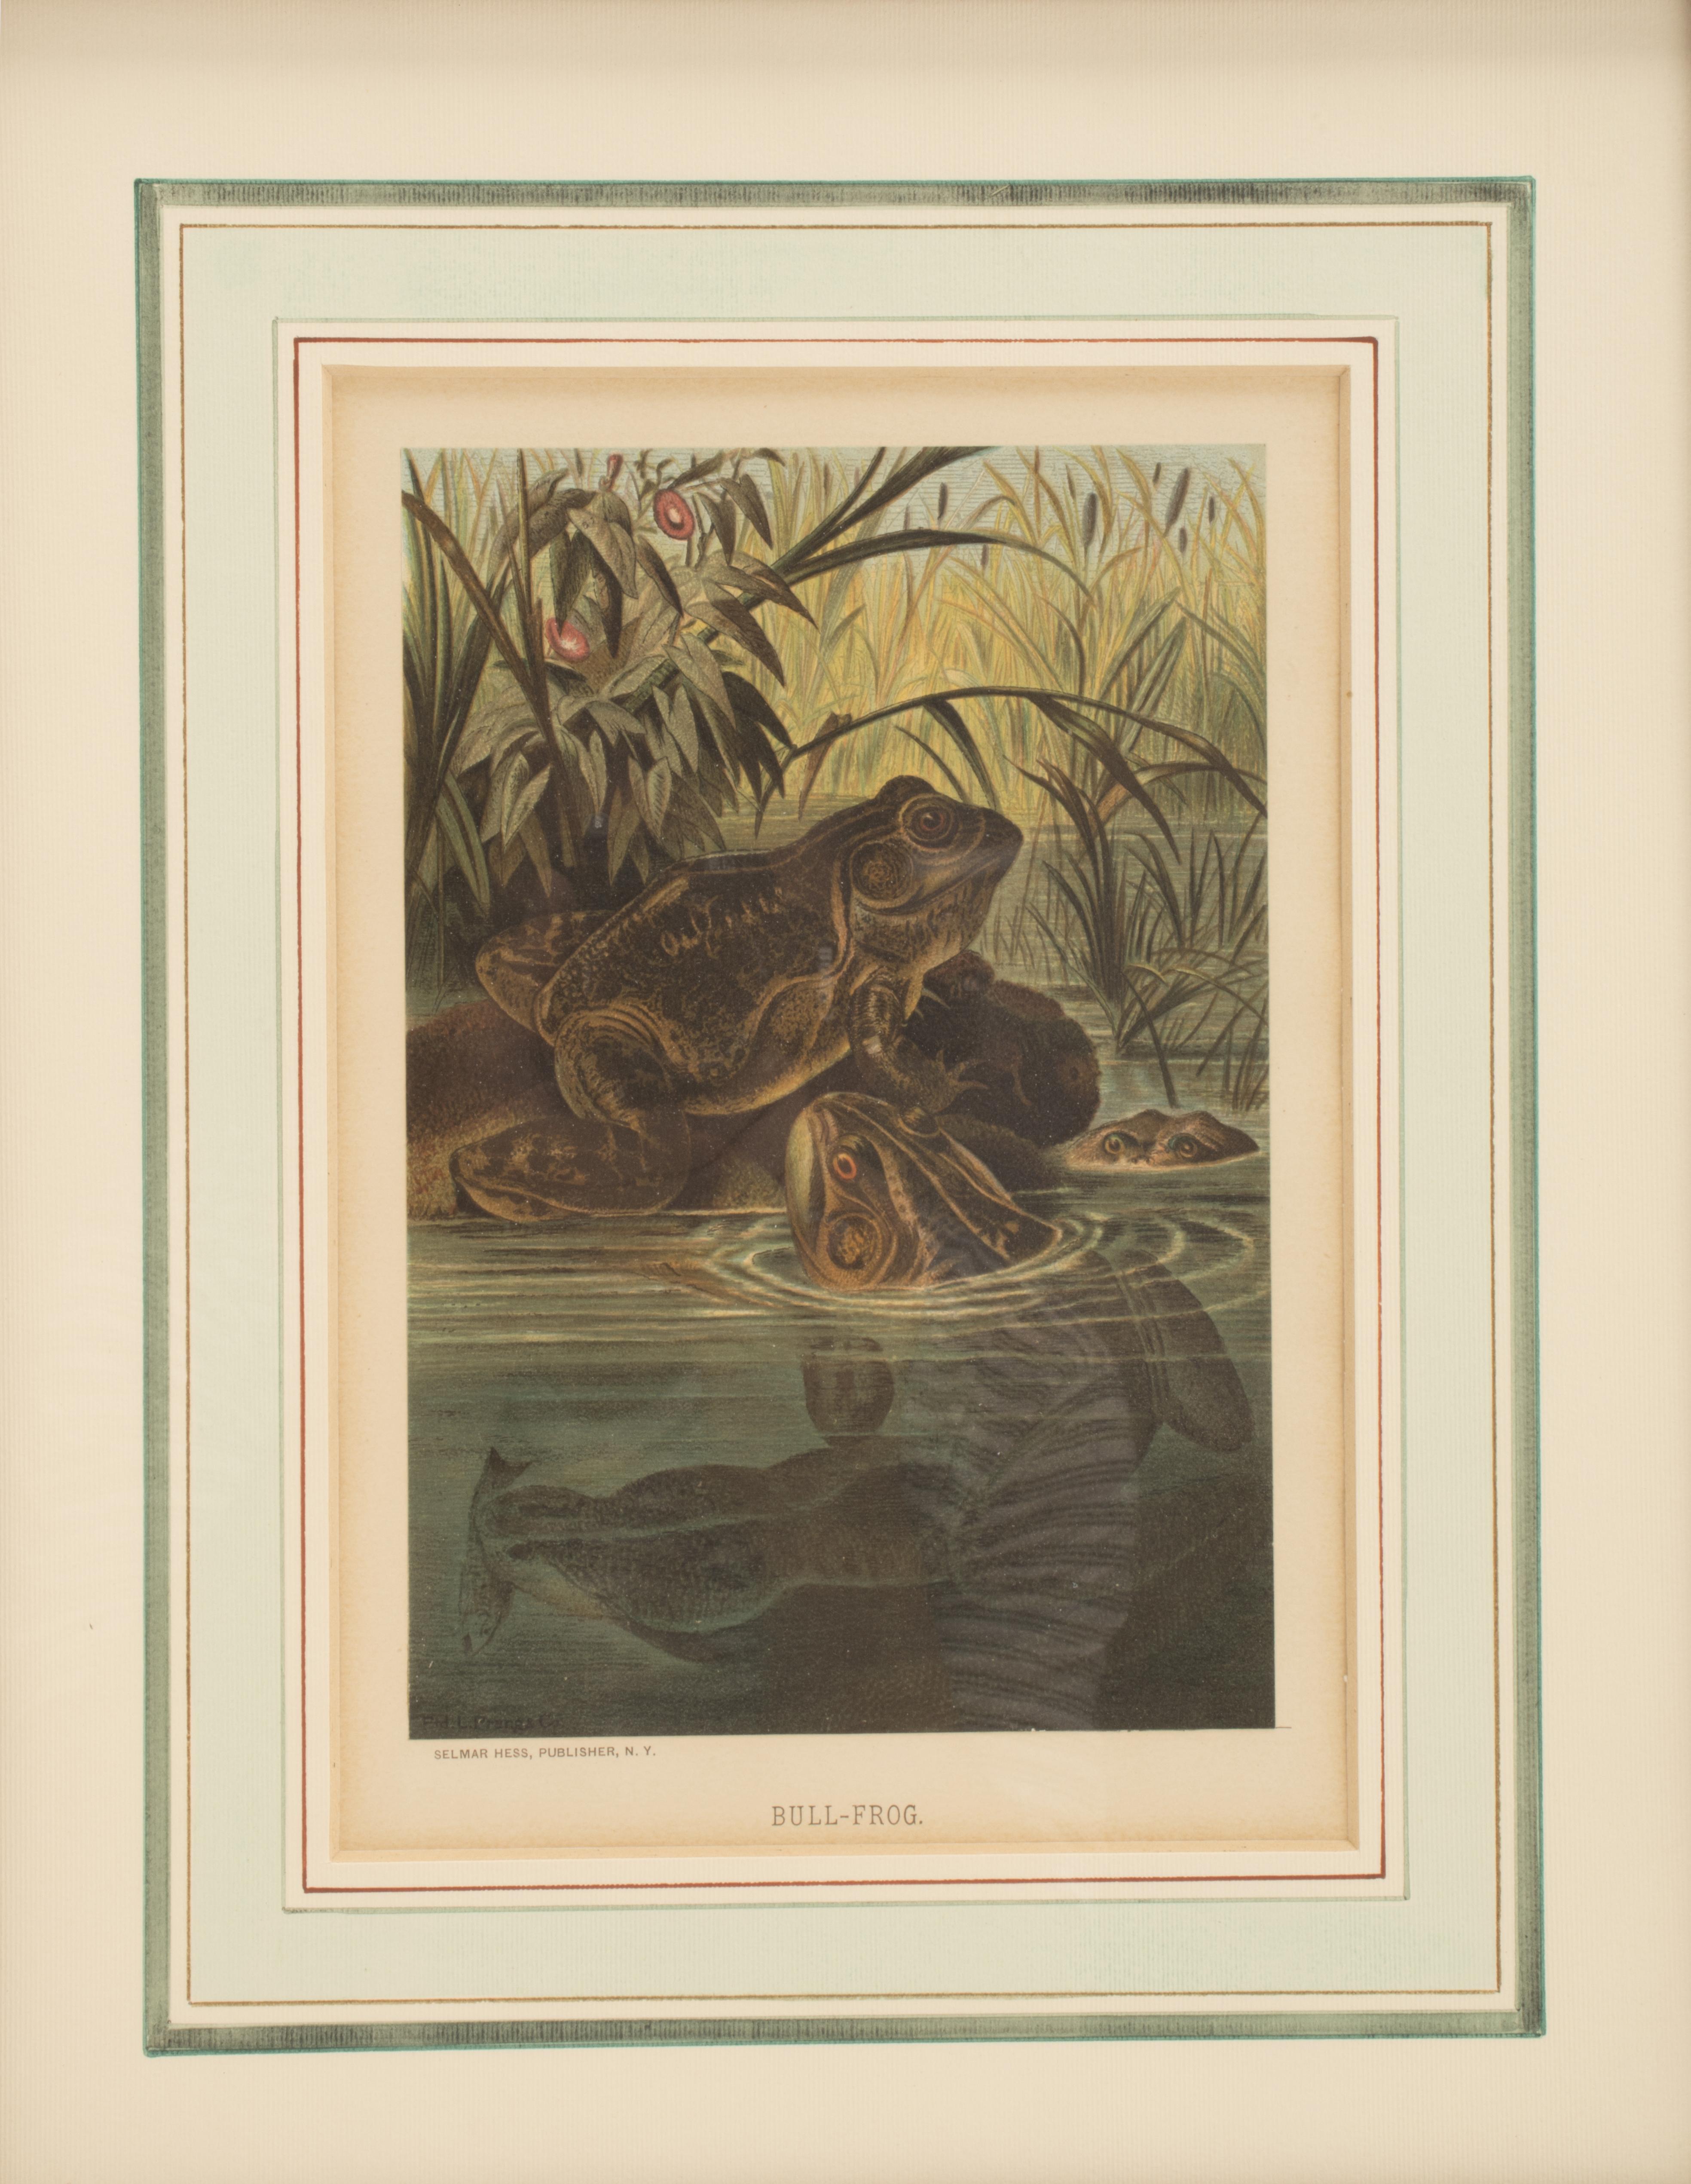 A color print, depicting bullfrogs in a pond. Selmar Hess Publisher, NY. Solid cherry wood frame, polished and beeswaxed. USA circa 1898.